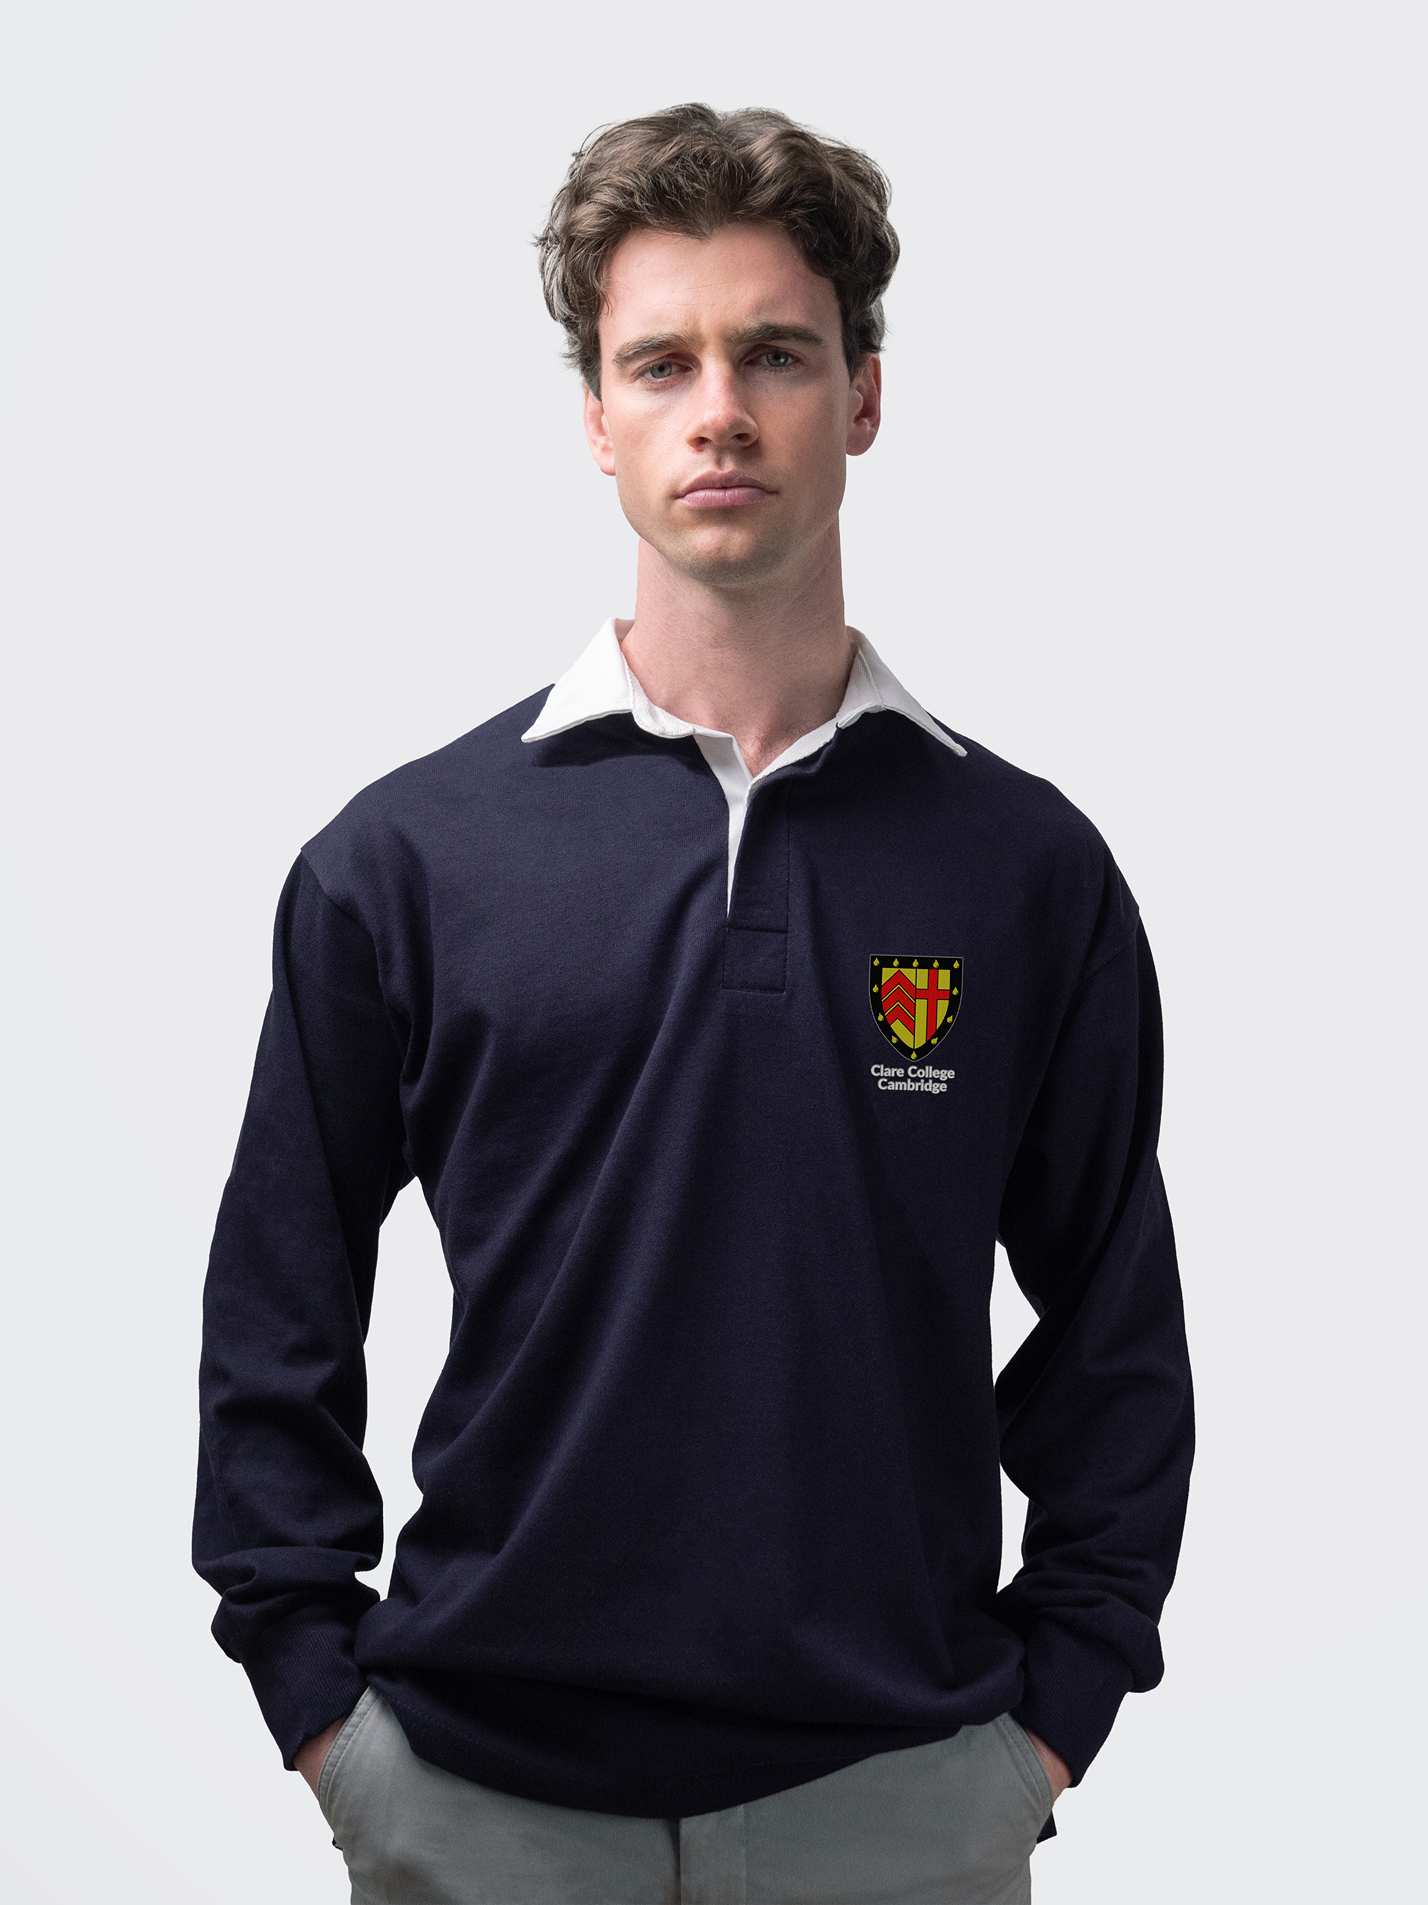 Clare student wearing an embroidered mens rugby shirt in navy